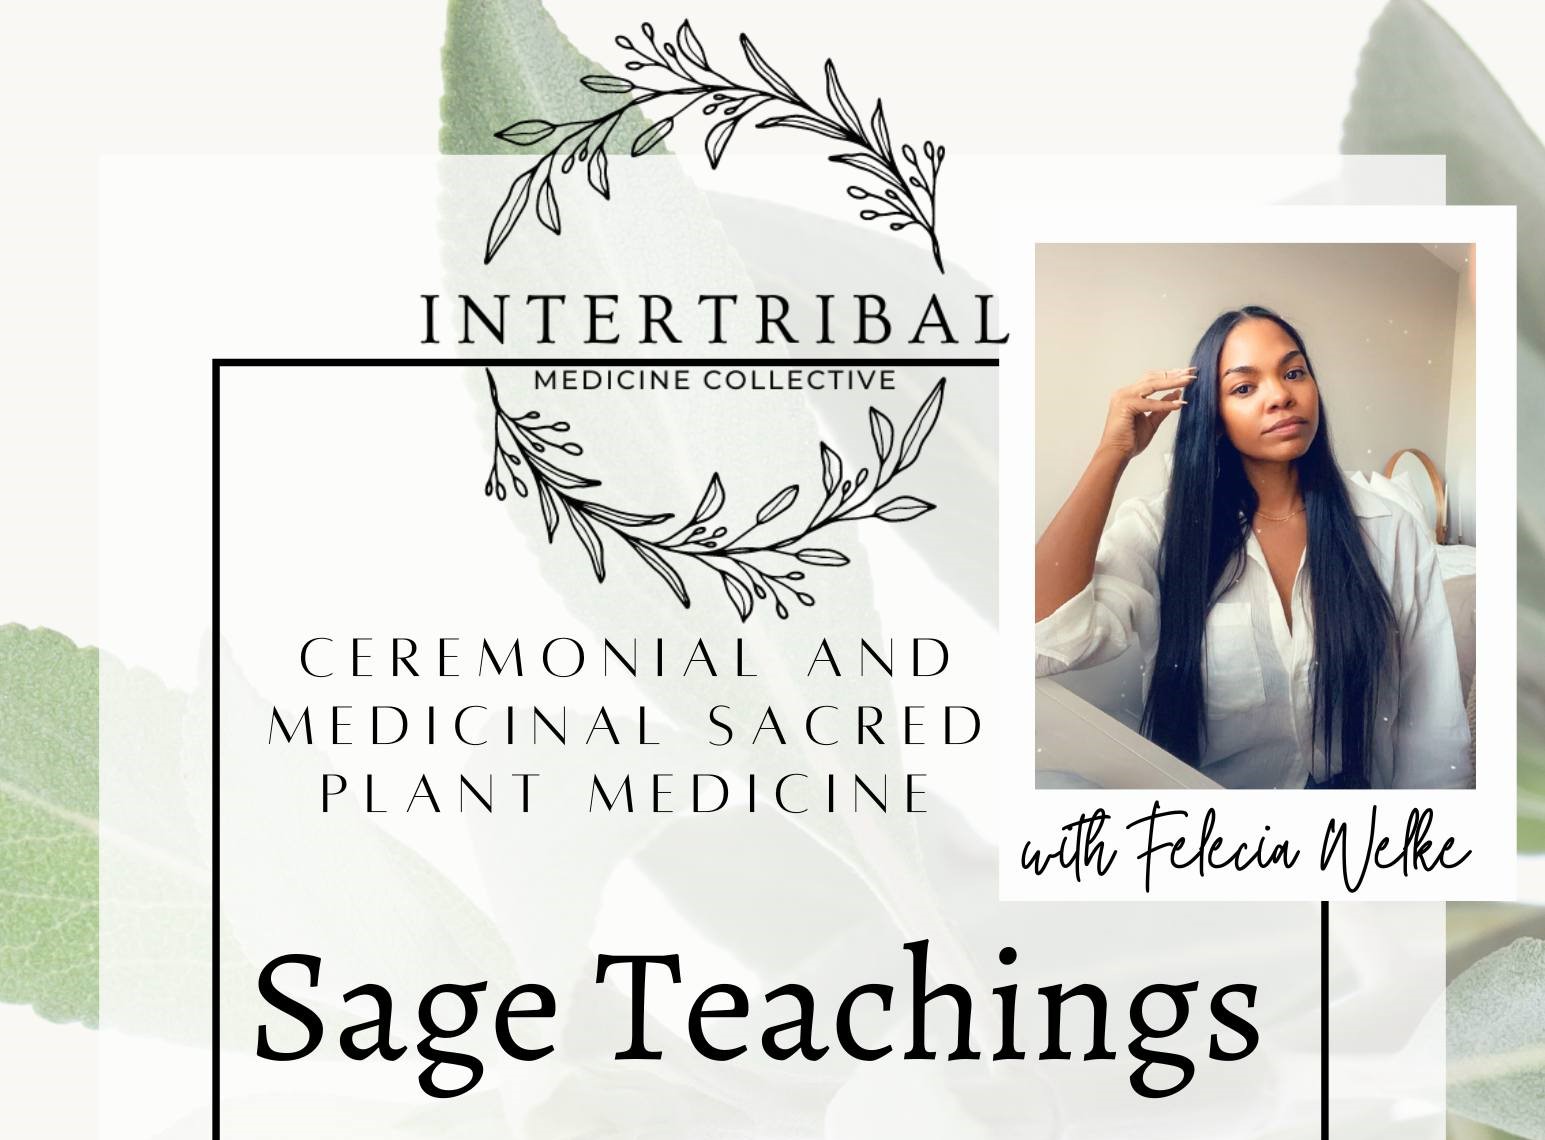 text: Intertribal Medicine Collective ceremonial and medicinal sacred plant medicine with Felecia Welke Sage teachings, along with photo of Felecia